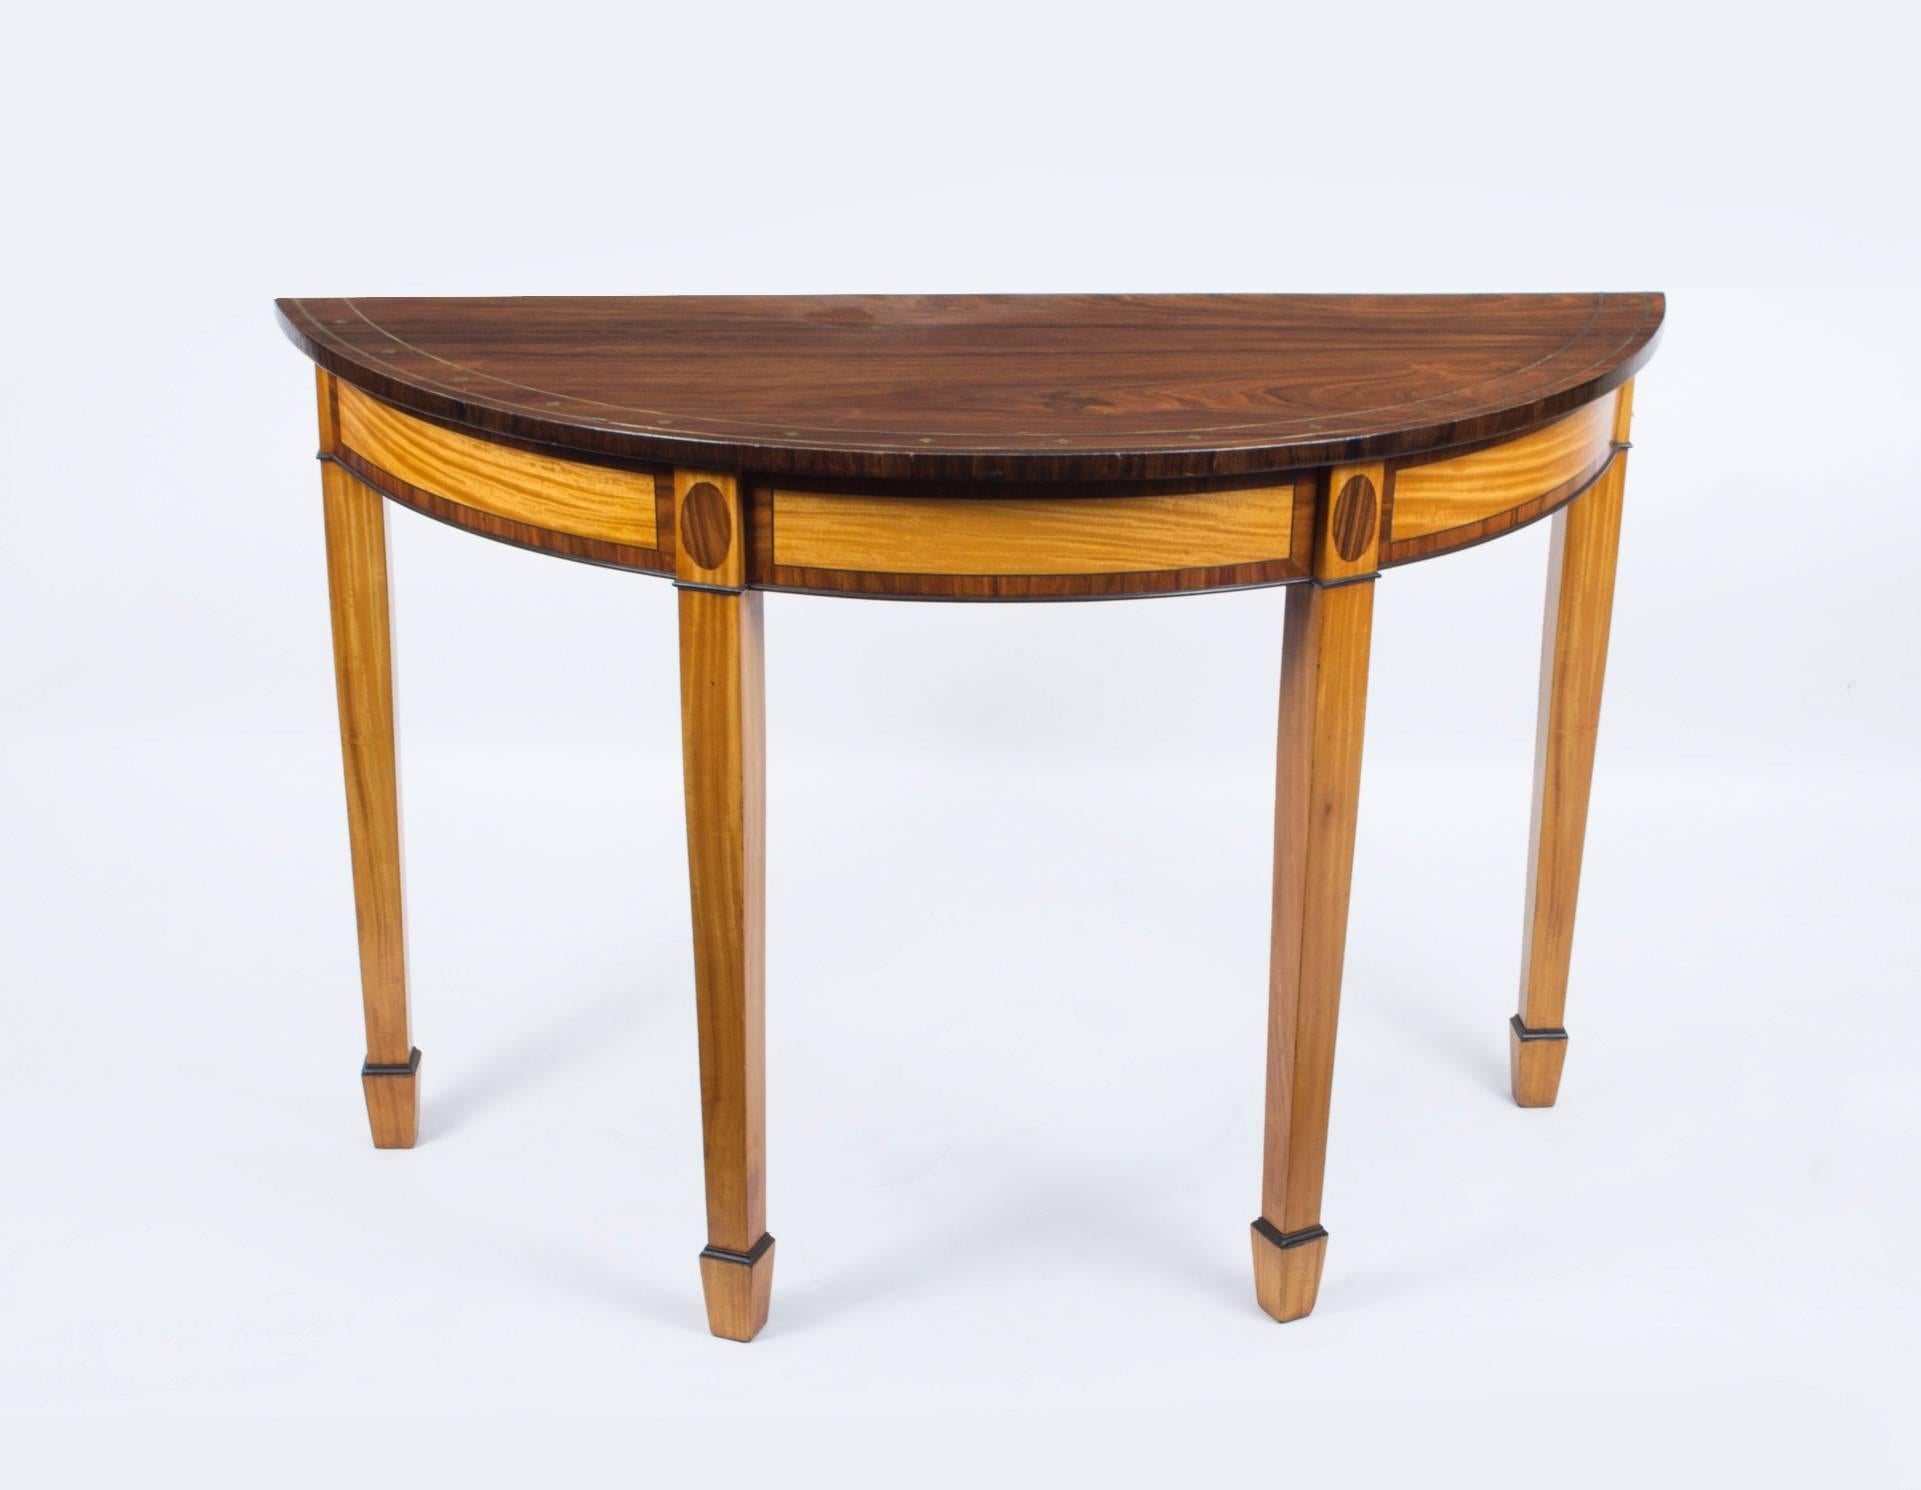 This is a rare antique pair of English Regency style demilune console tables, circa 1900.

They feature elaborate brass inlaid decoration around the tops and are made from two woods which compliment themselves: Rosewood and satinwood.

There is